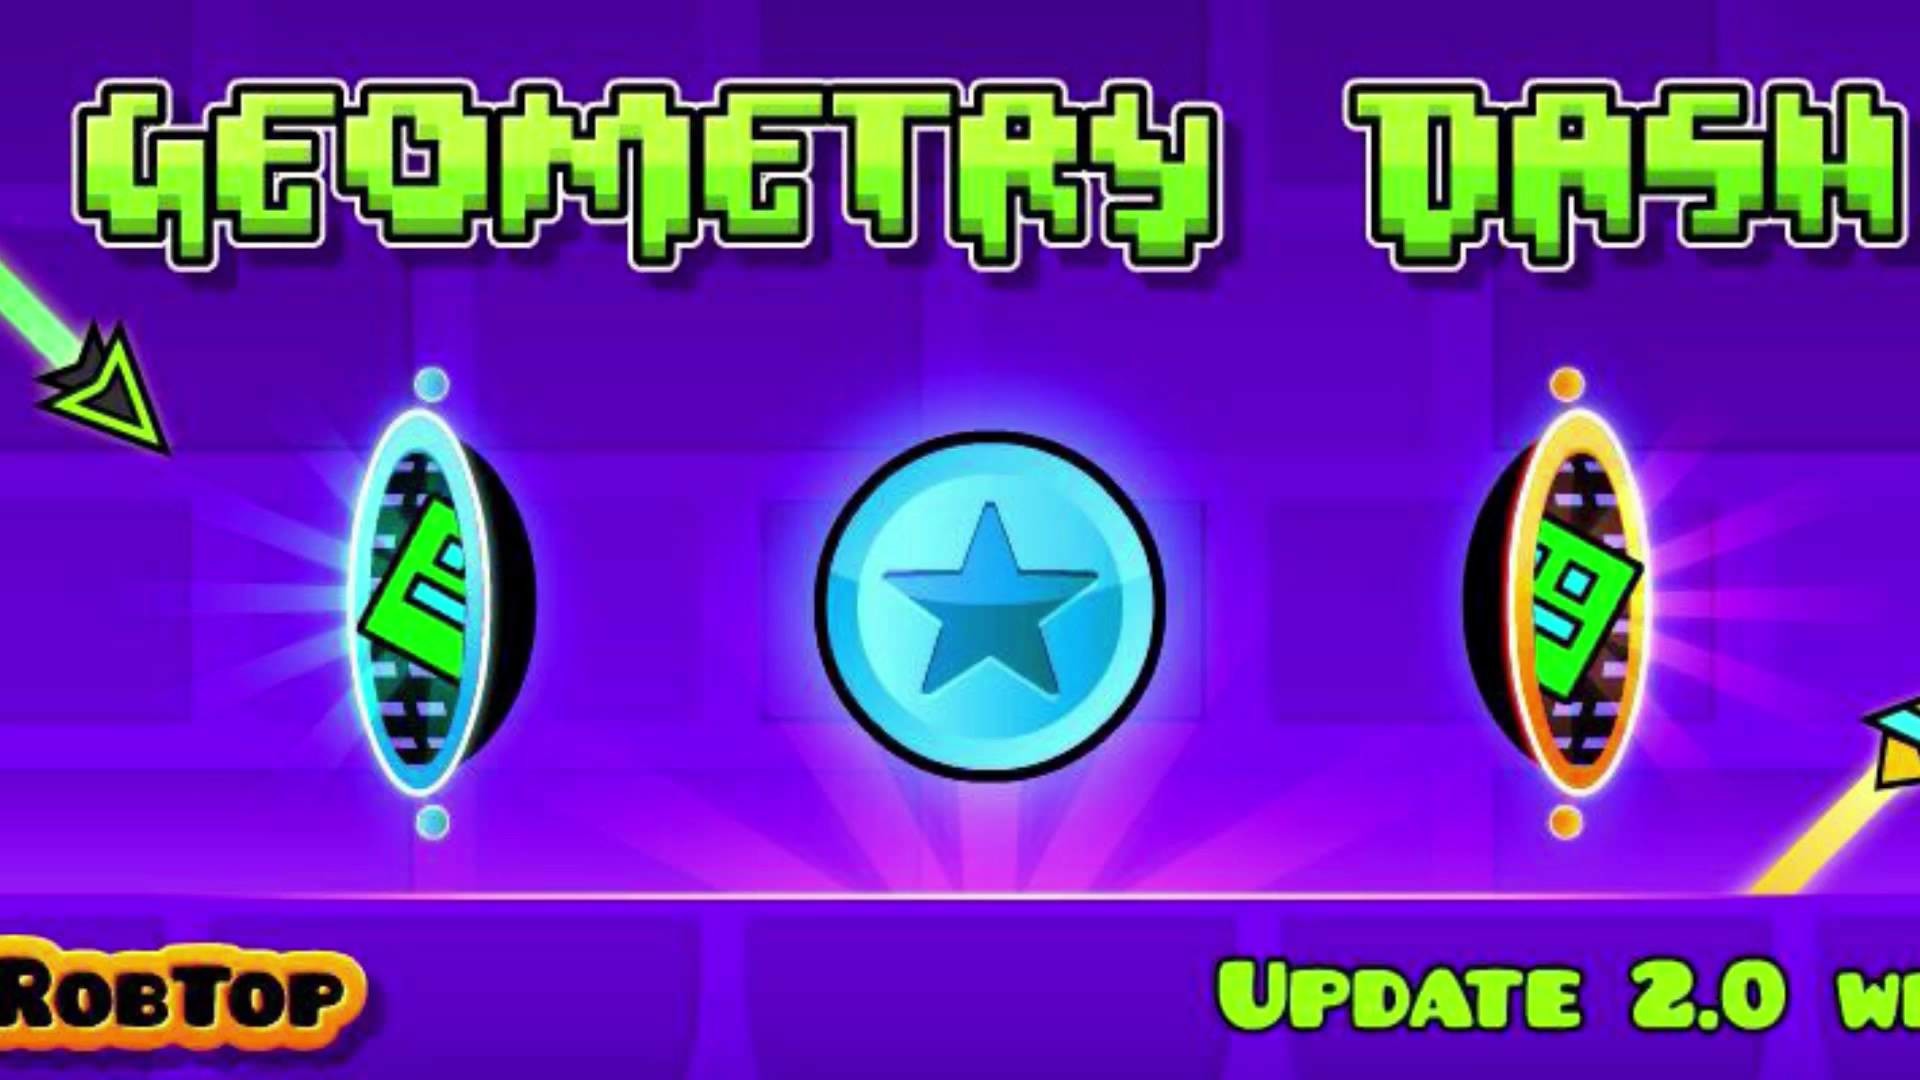 1920x1080 Going Over This Again - Geometry Dash 2.0 Hint